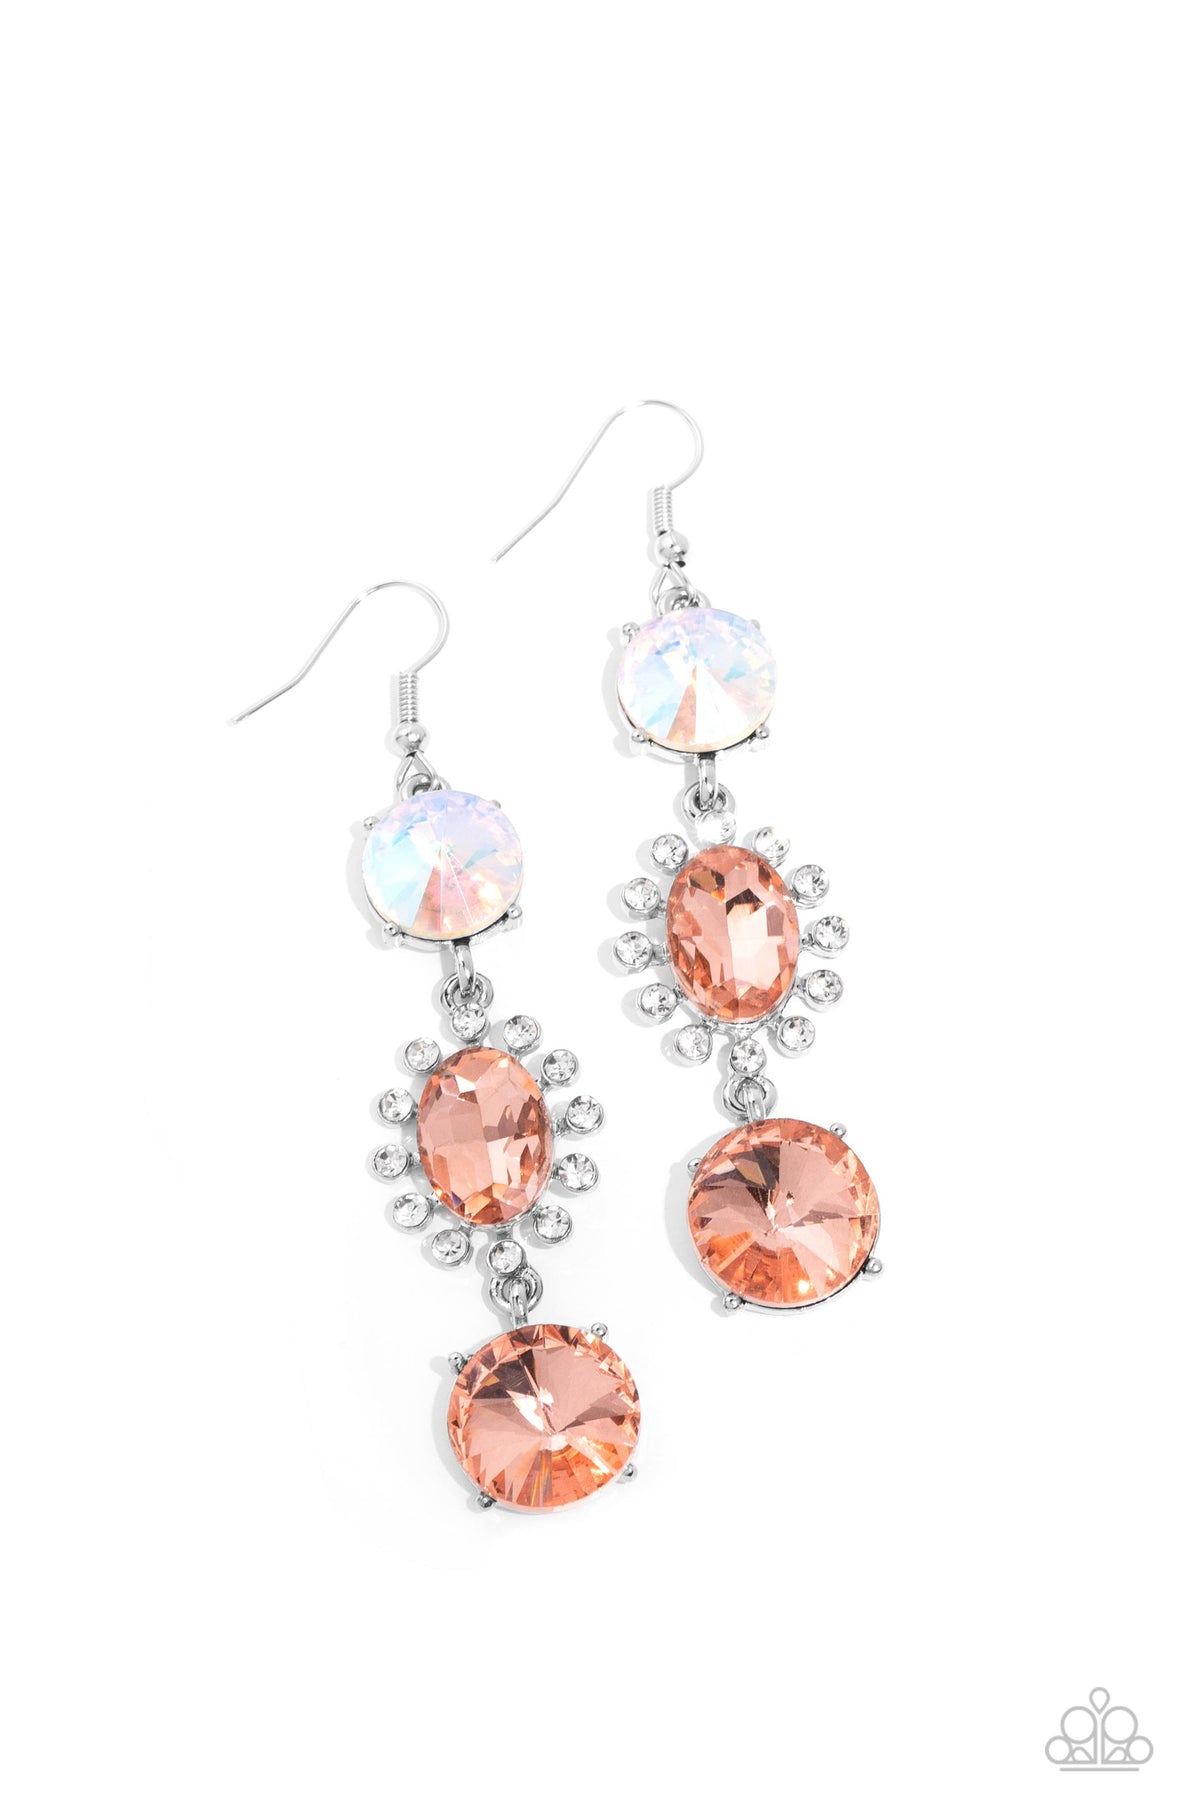 Magical Melodrama Multi Peach and Iridescent Rhinestone Earrings - Paparazzi Accessories- lightbox - CarasShop.com - $5 Jewelry by Cara Jewels